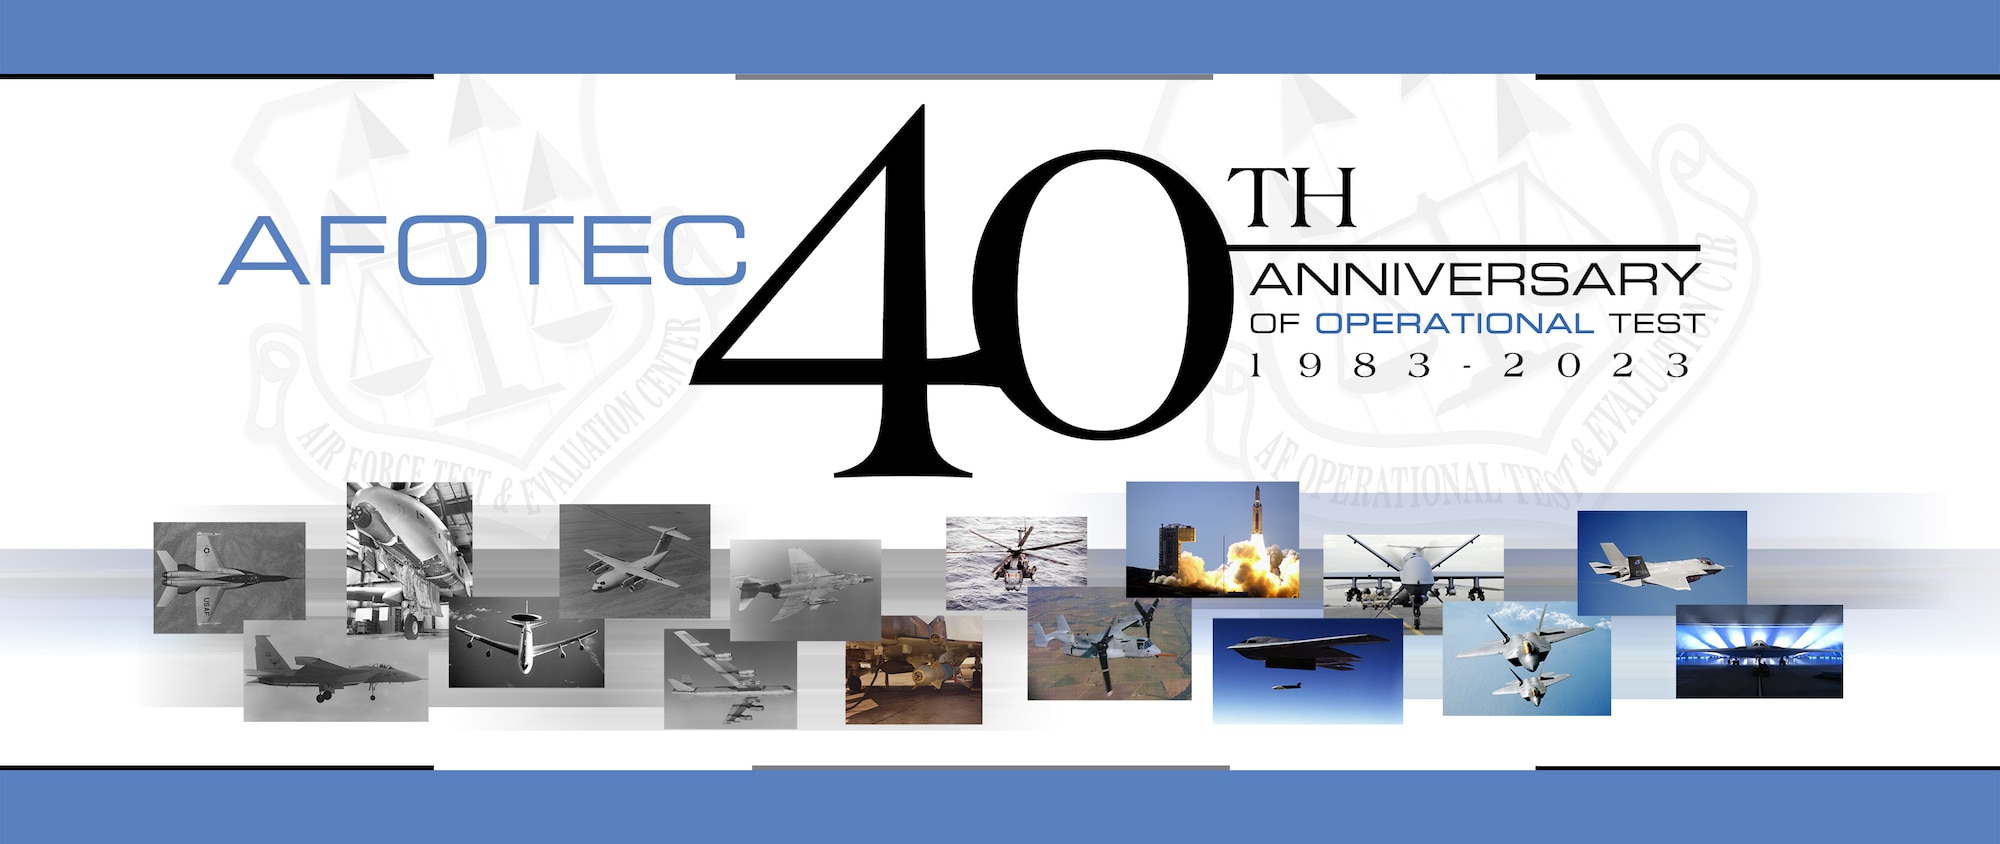 The Air Force Operational Test and Evaluation Center celebrates 40 years of operational testing.